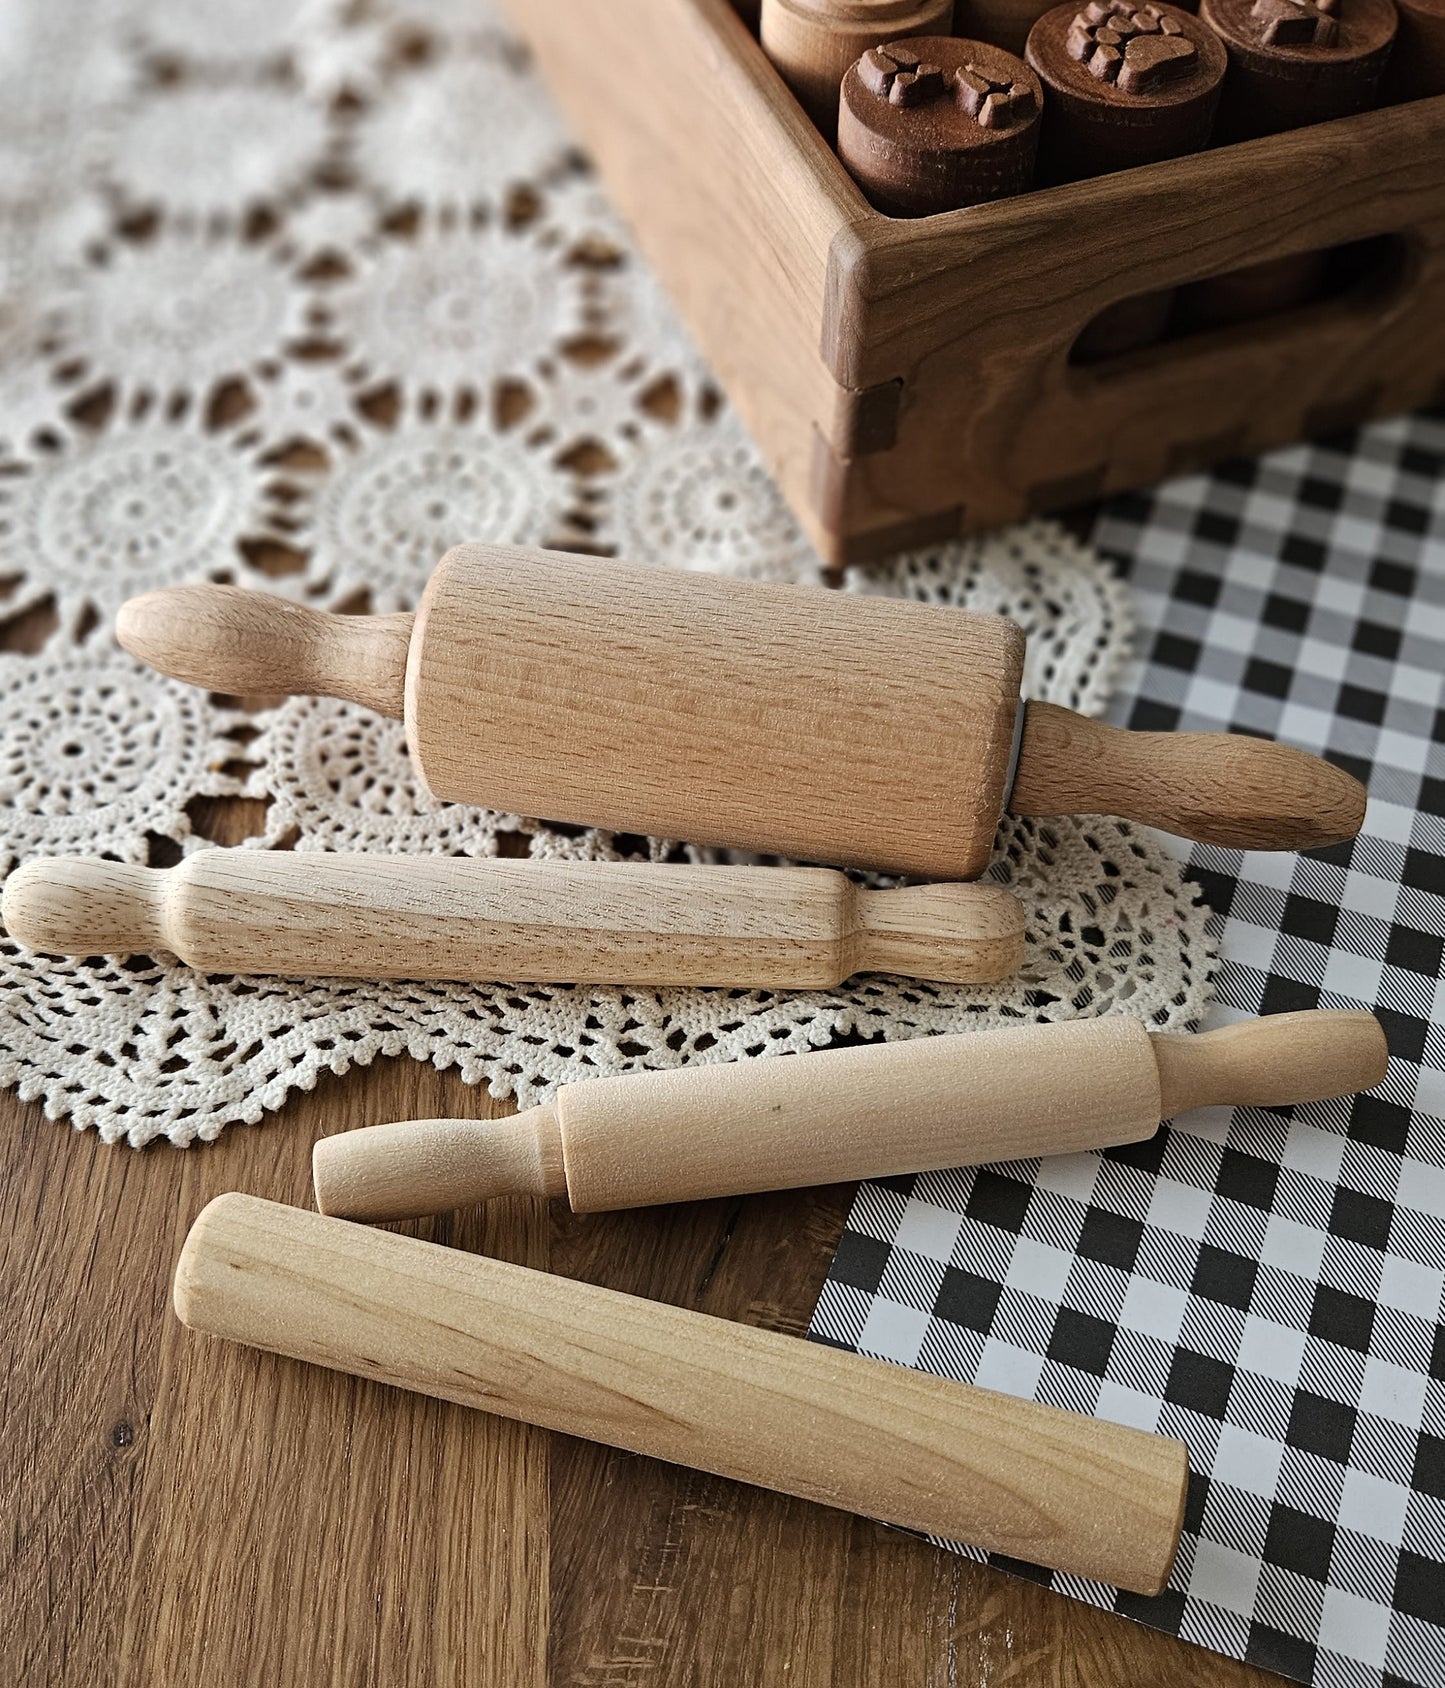 All Wood Rolling Pin